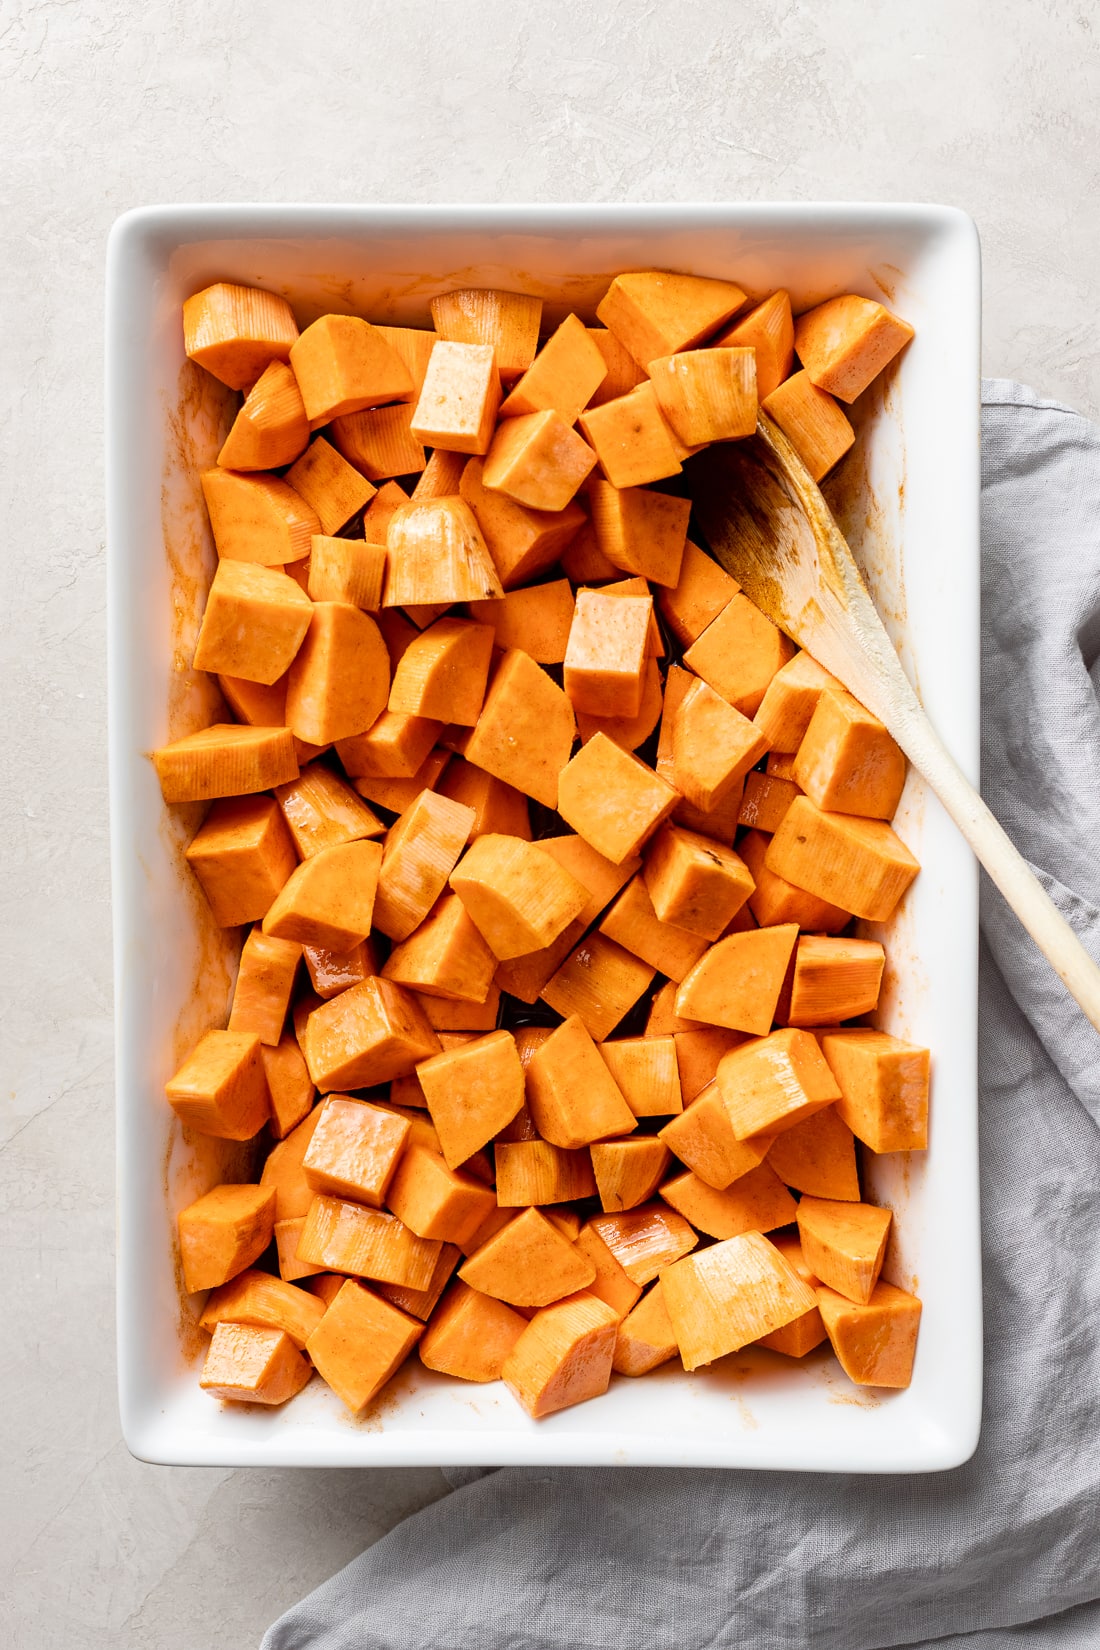 Chopped sweet potatoes, ready to toss and bake.